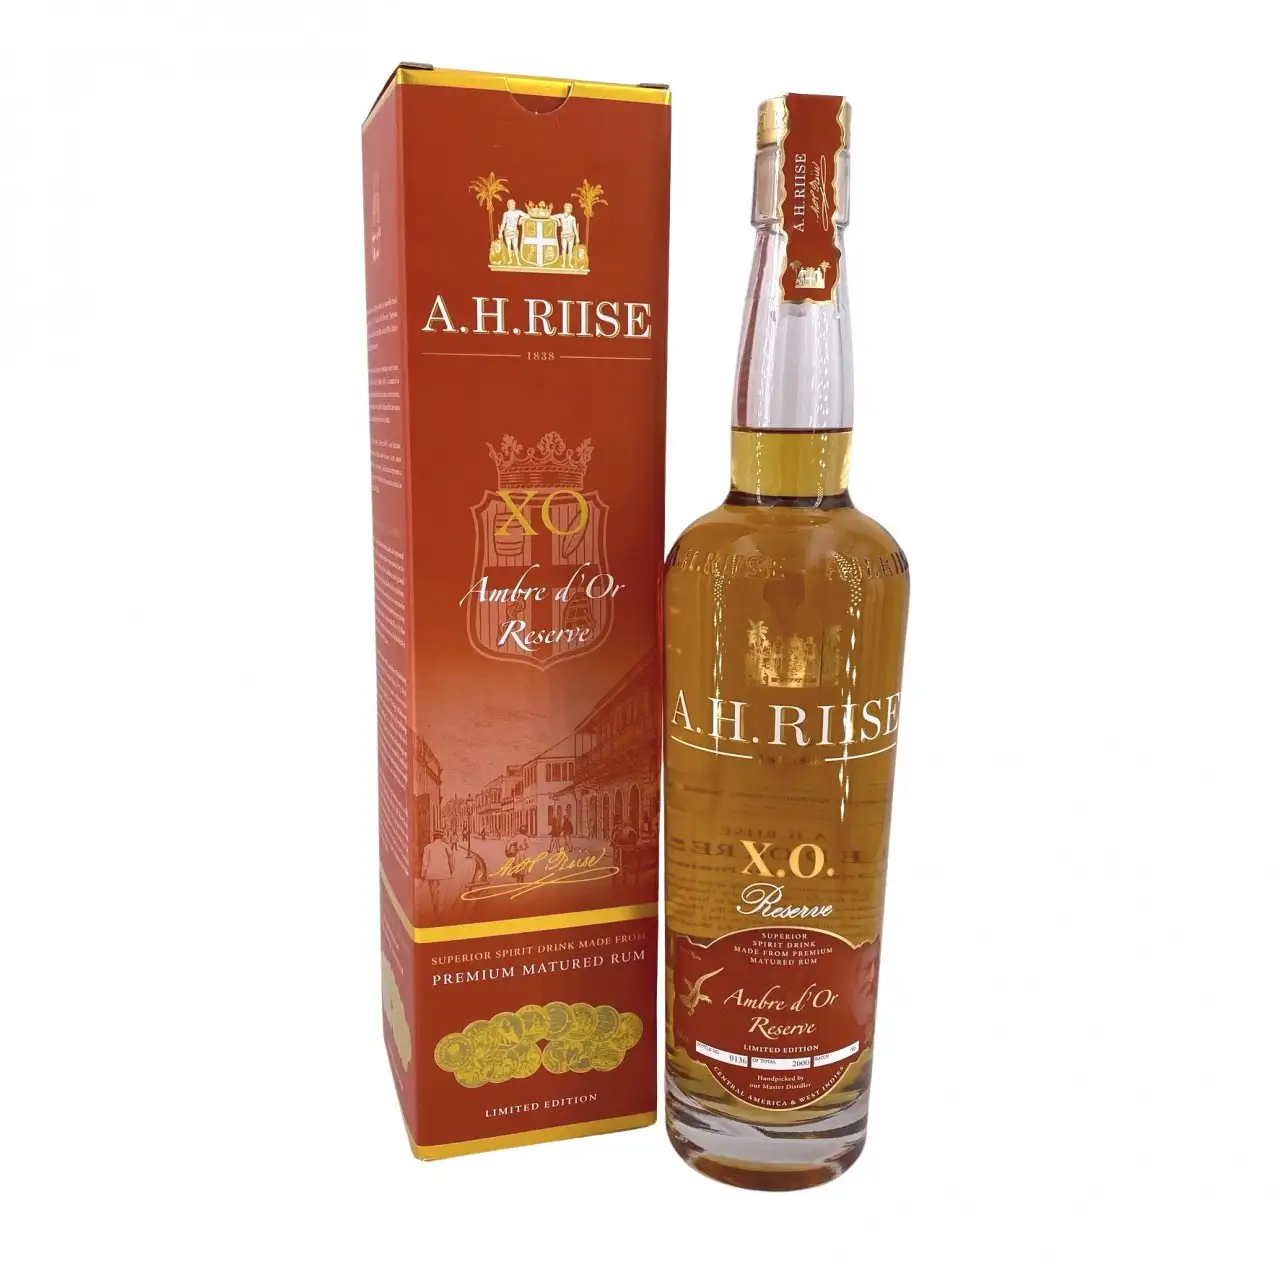 Image of the front of the bottle of the rum XO Ambre d‘Or Reserve